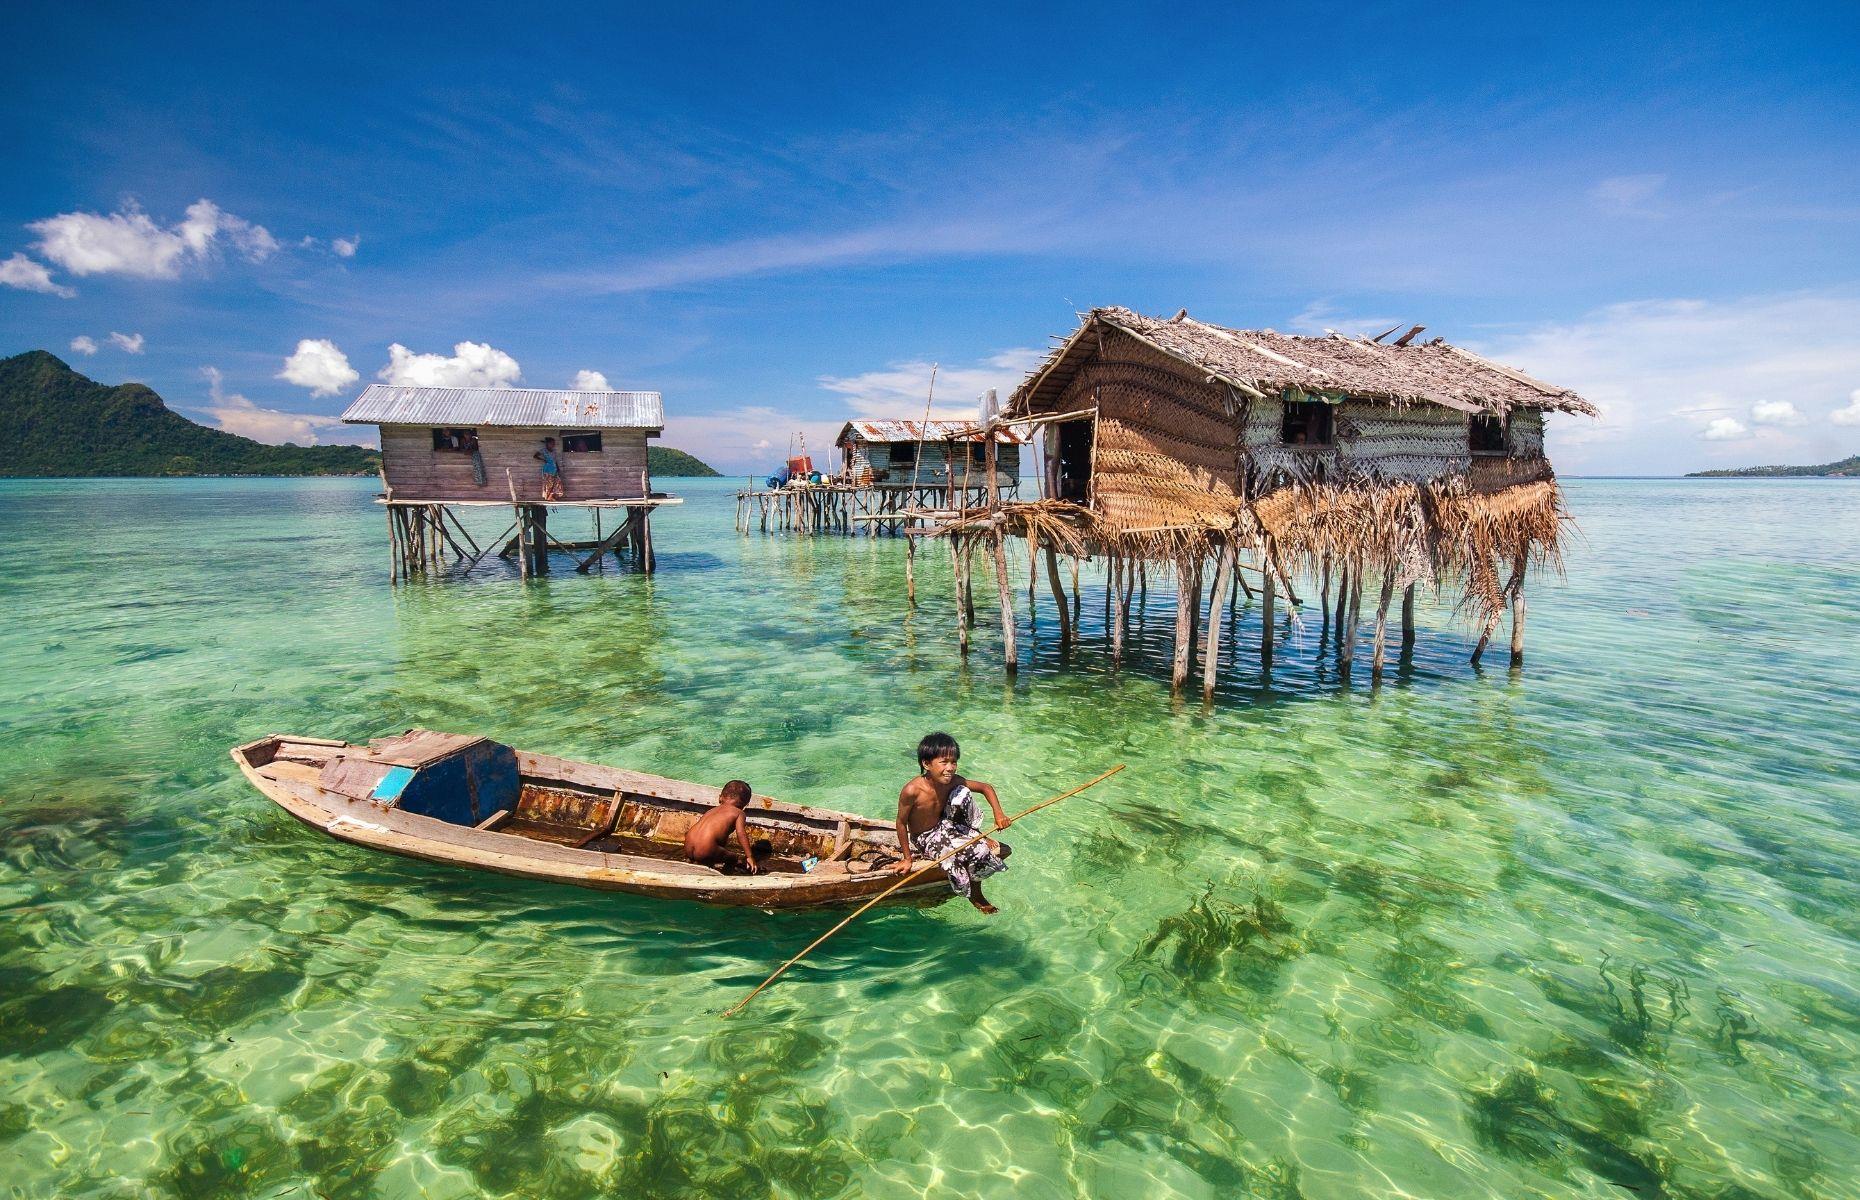 <p>Amazingly, new research has found that the reason the Bajau can dive for such long periods of time might be down to a DNA mutation, which has given the tribe larger spleens. Although their numbers have decreased, the sea nomads still follow a very traditional way of life. Sadly, though, they're still not recognised by any state, have no citizenship and no rights to settle on land. Plus industrial fishing is also putting their self-sustained way of life under threat.</p>